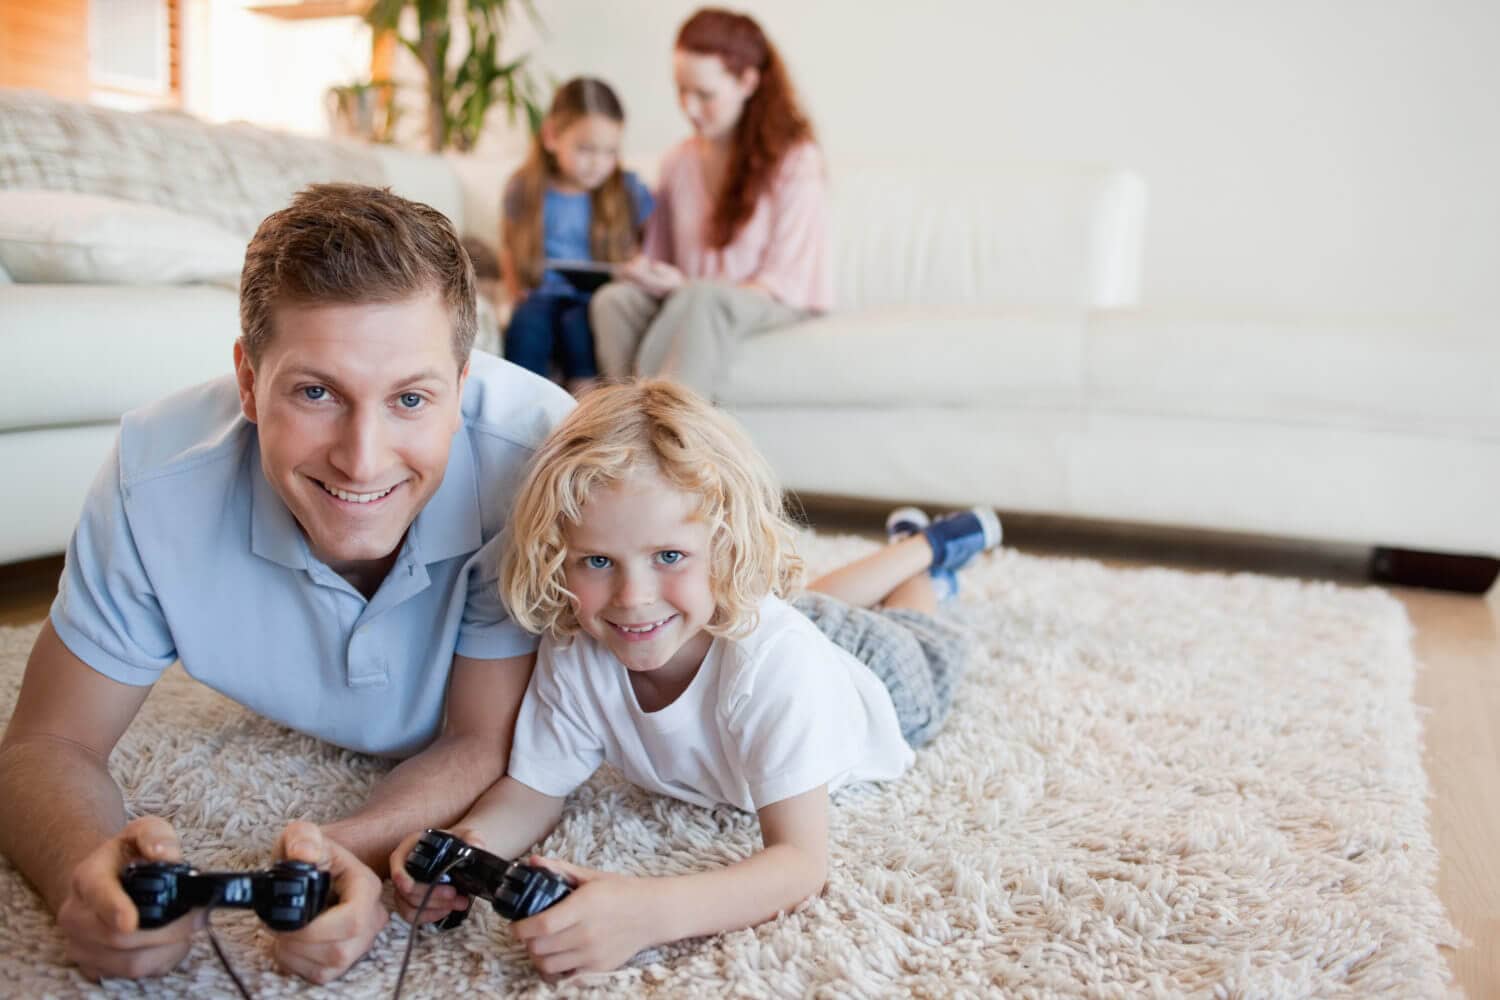 carpet cleaning grosse pointe woods